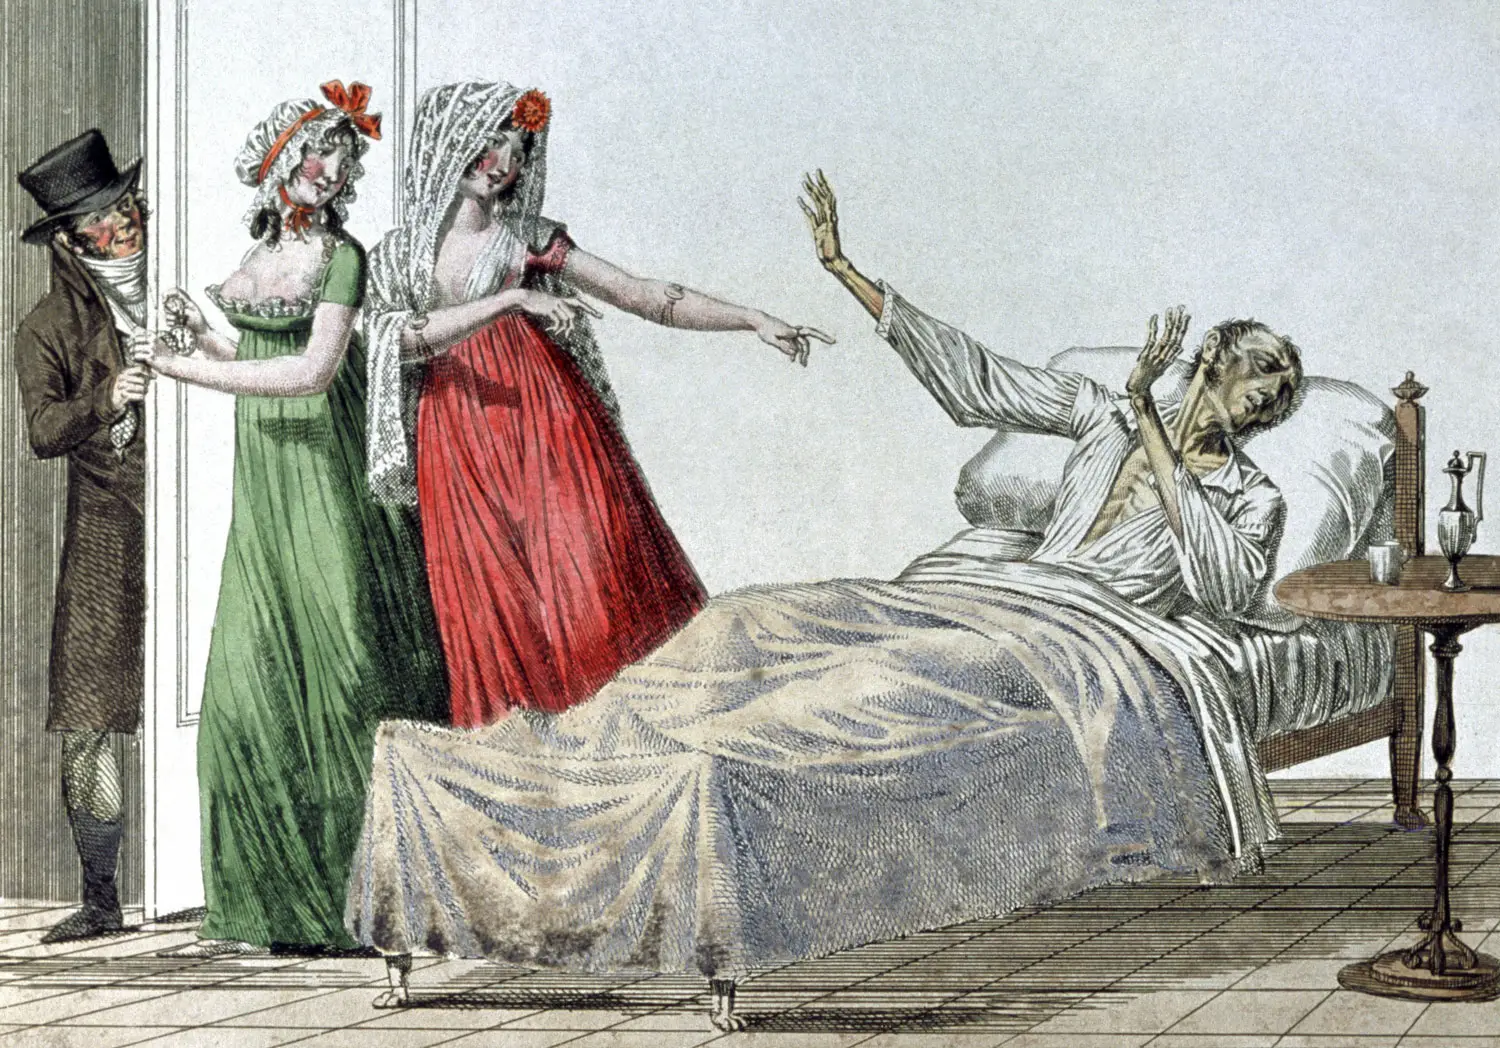 A bedridden, gaunt man stares away in lamentation while raising his arms at two women, faces covered in red pockmarks hinting at disease, who stare back at him and point at him, perhaps with pity or accusation, as they leave the room.